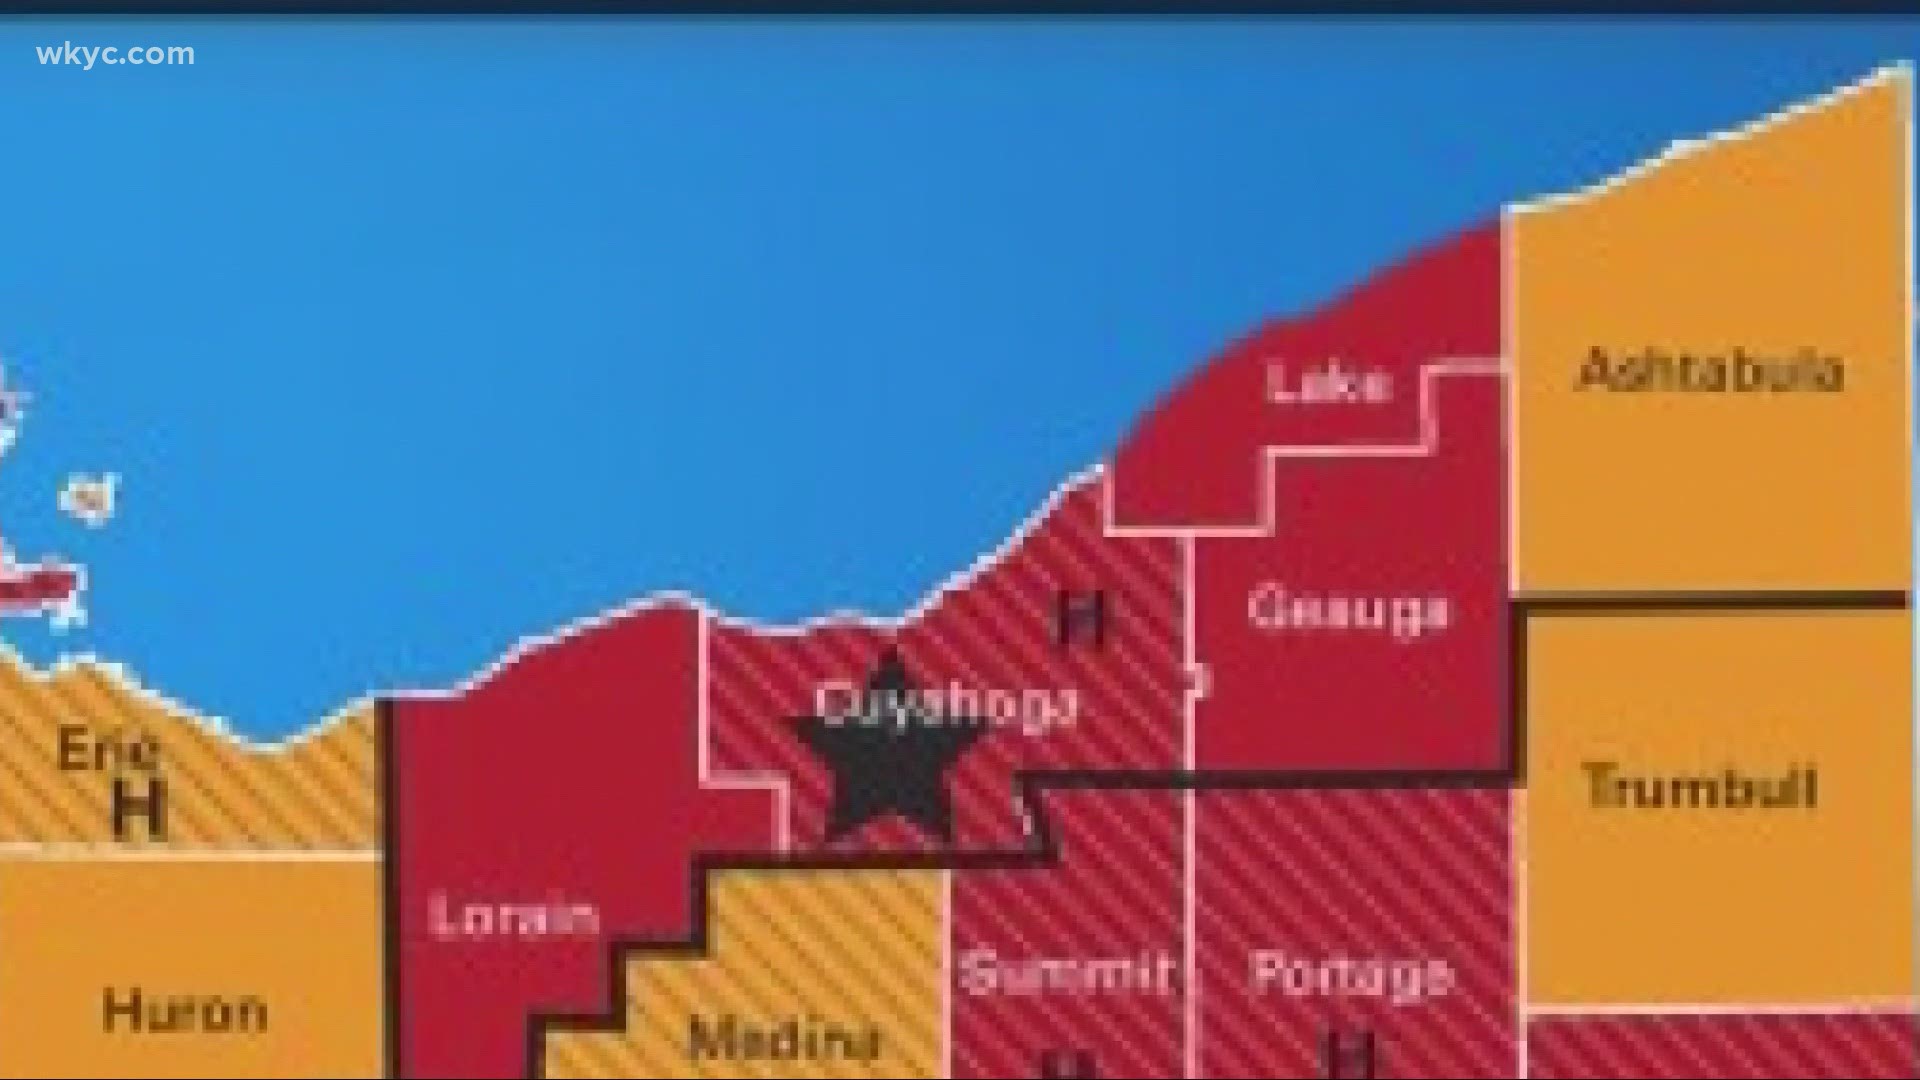 Three Ohio counties - including Cuyahoga - have been on the watch list to move to the state's highest level of spread. Laura Caso reports.